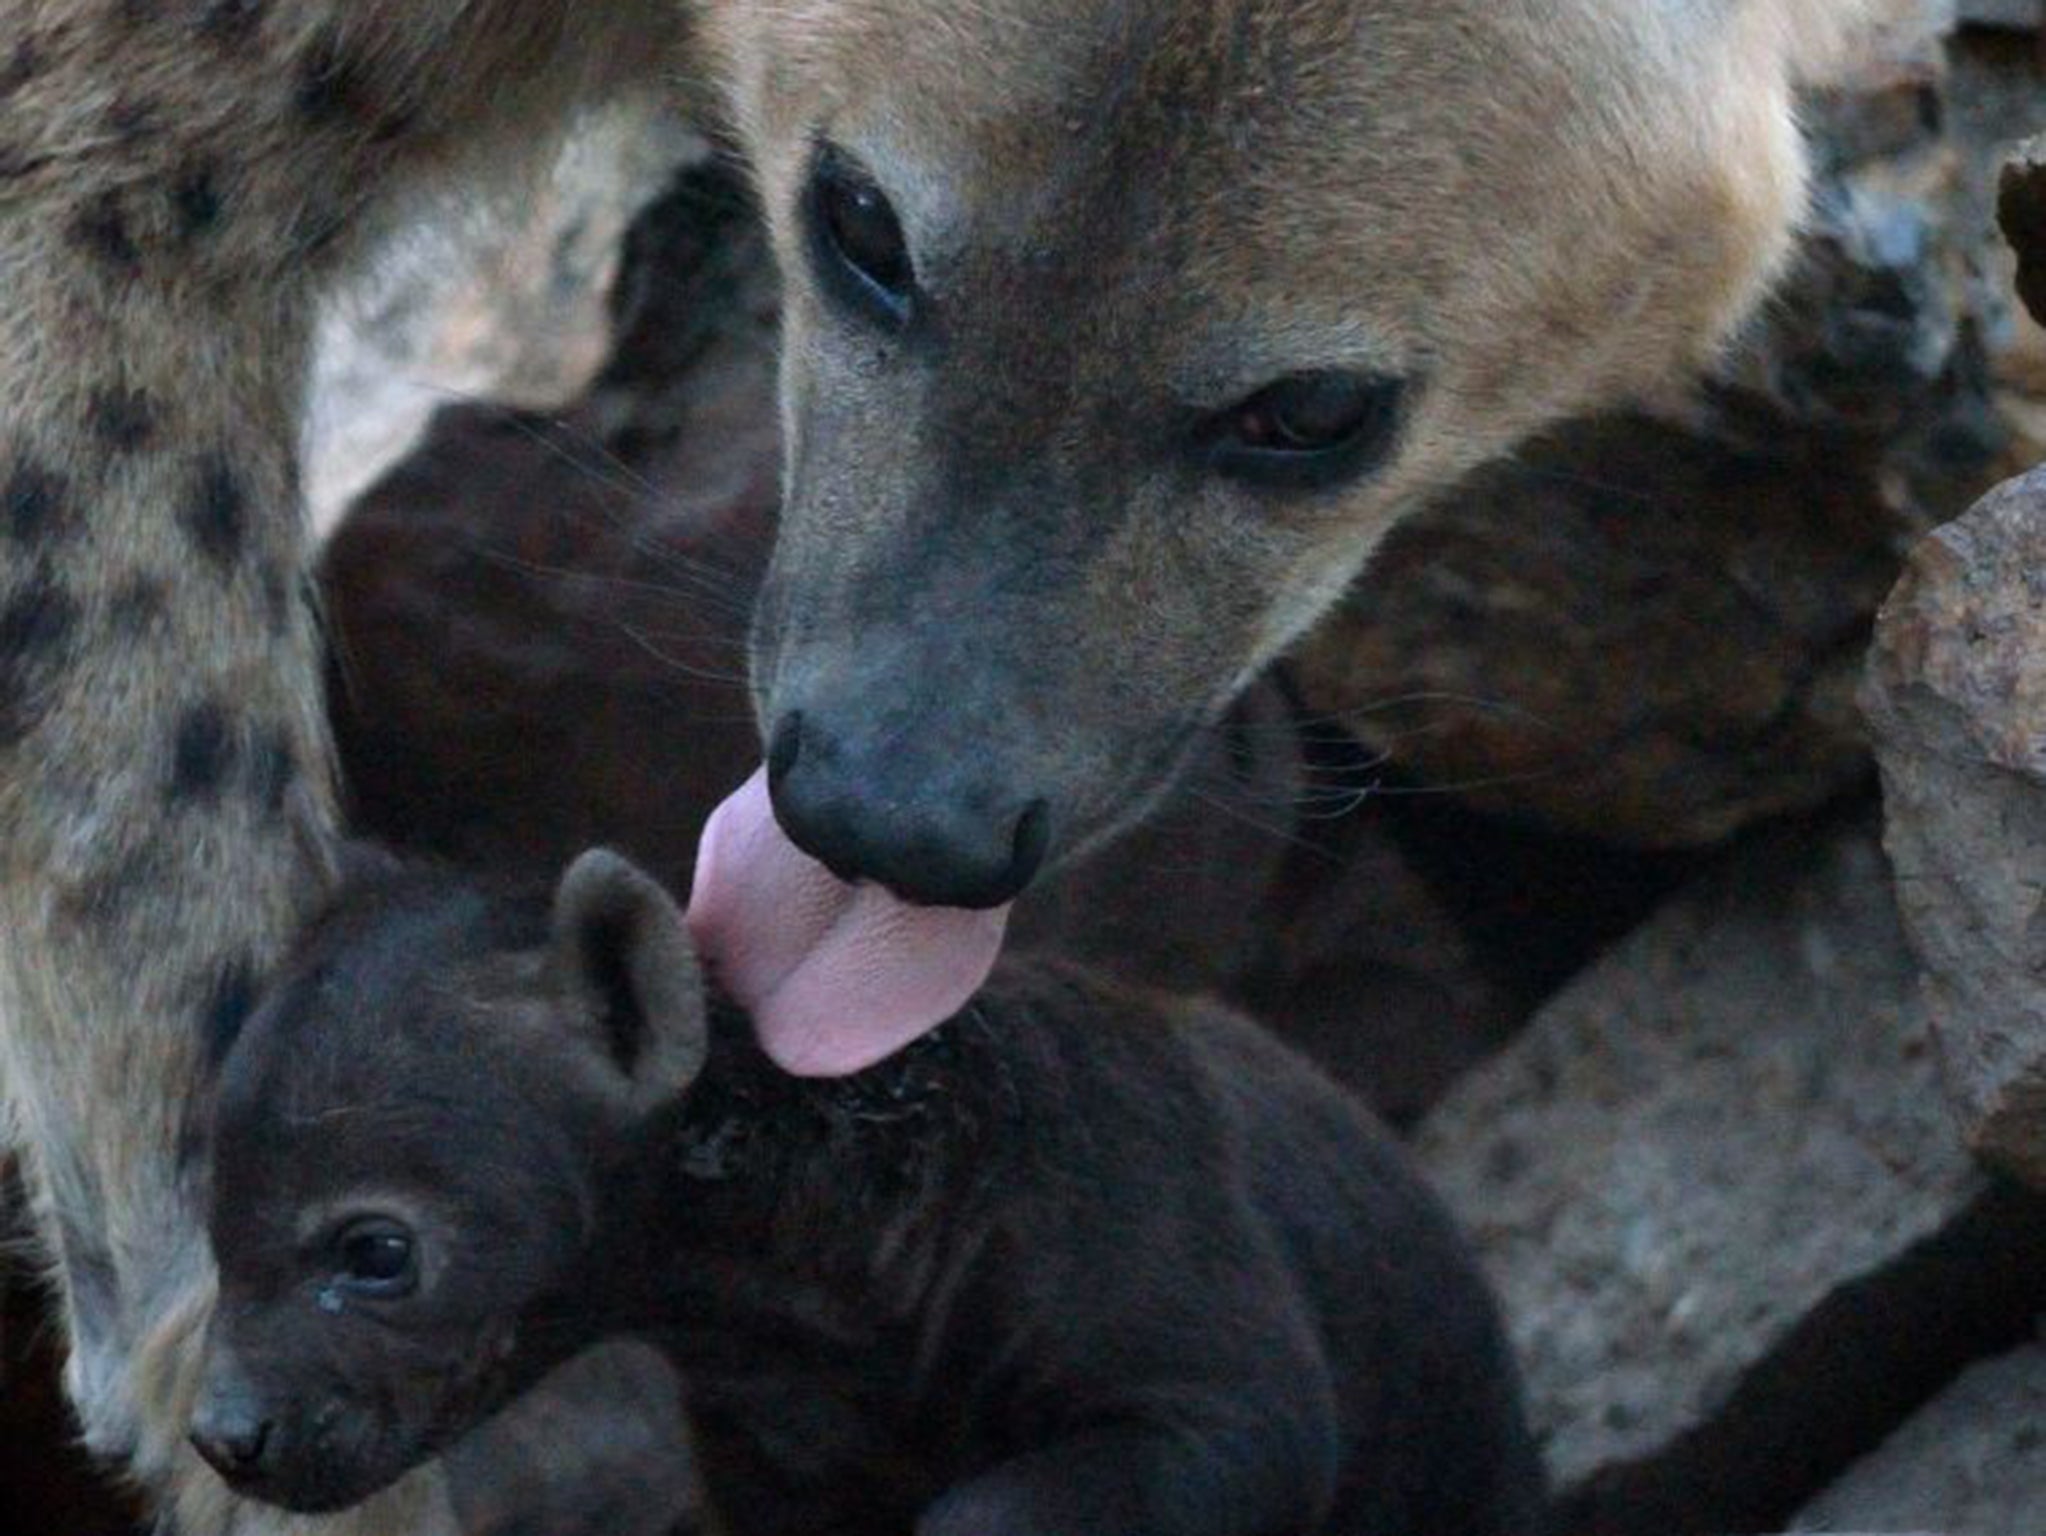 Mark Jones believes hyenas to be very social, caring and attractive animals